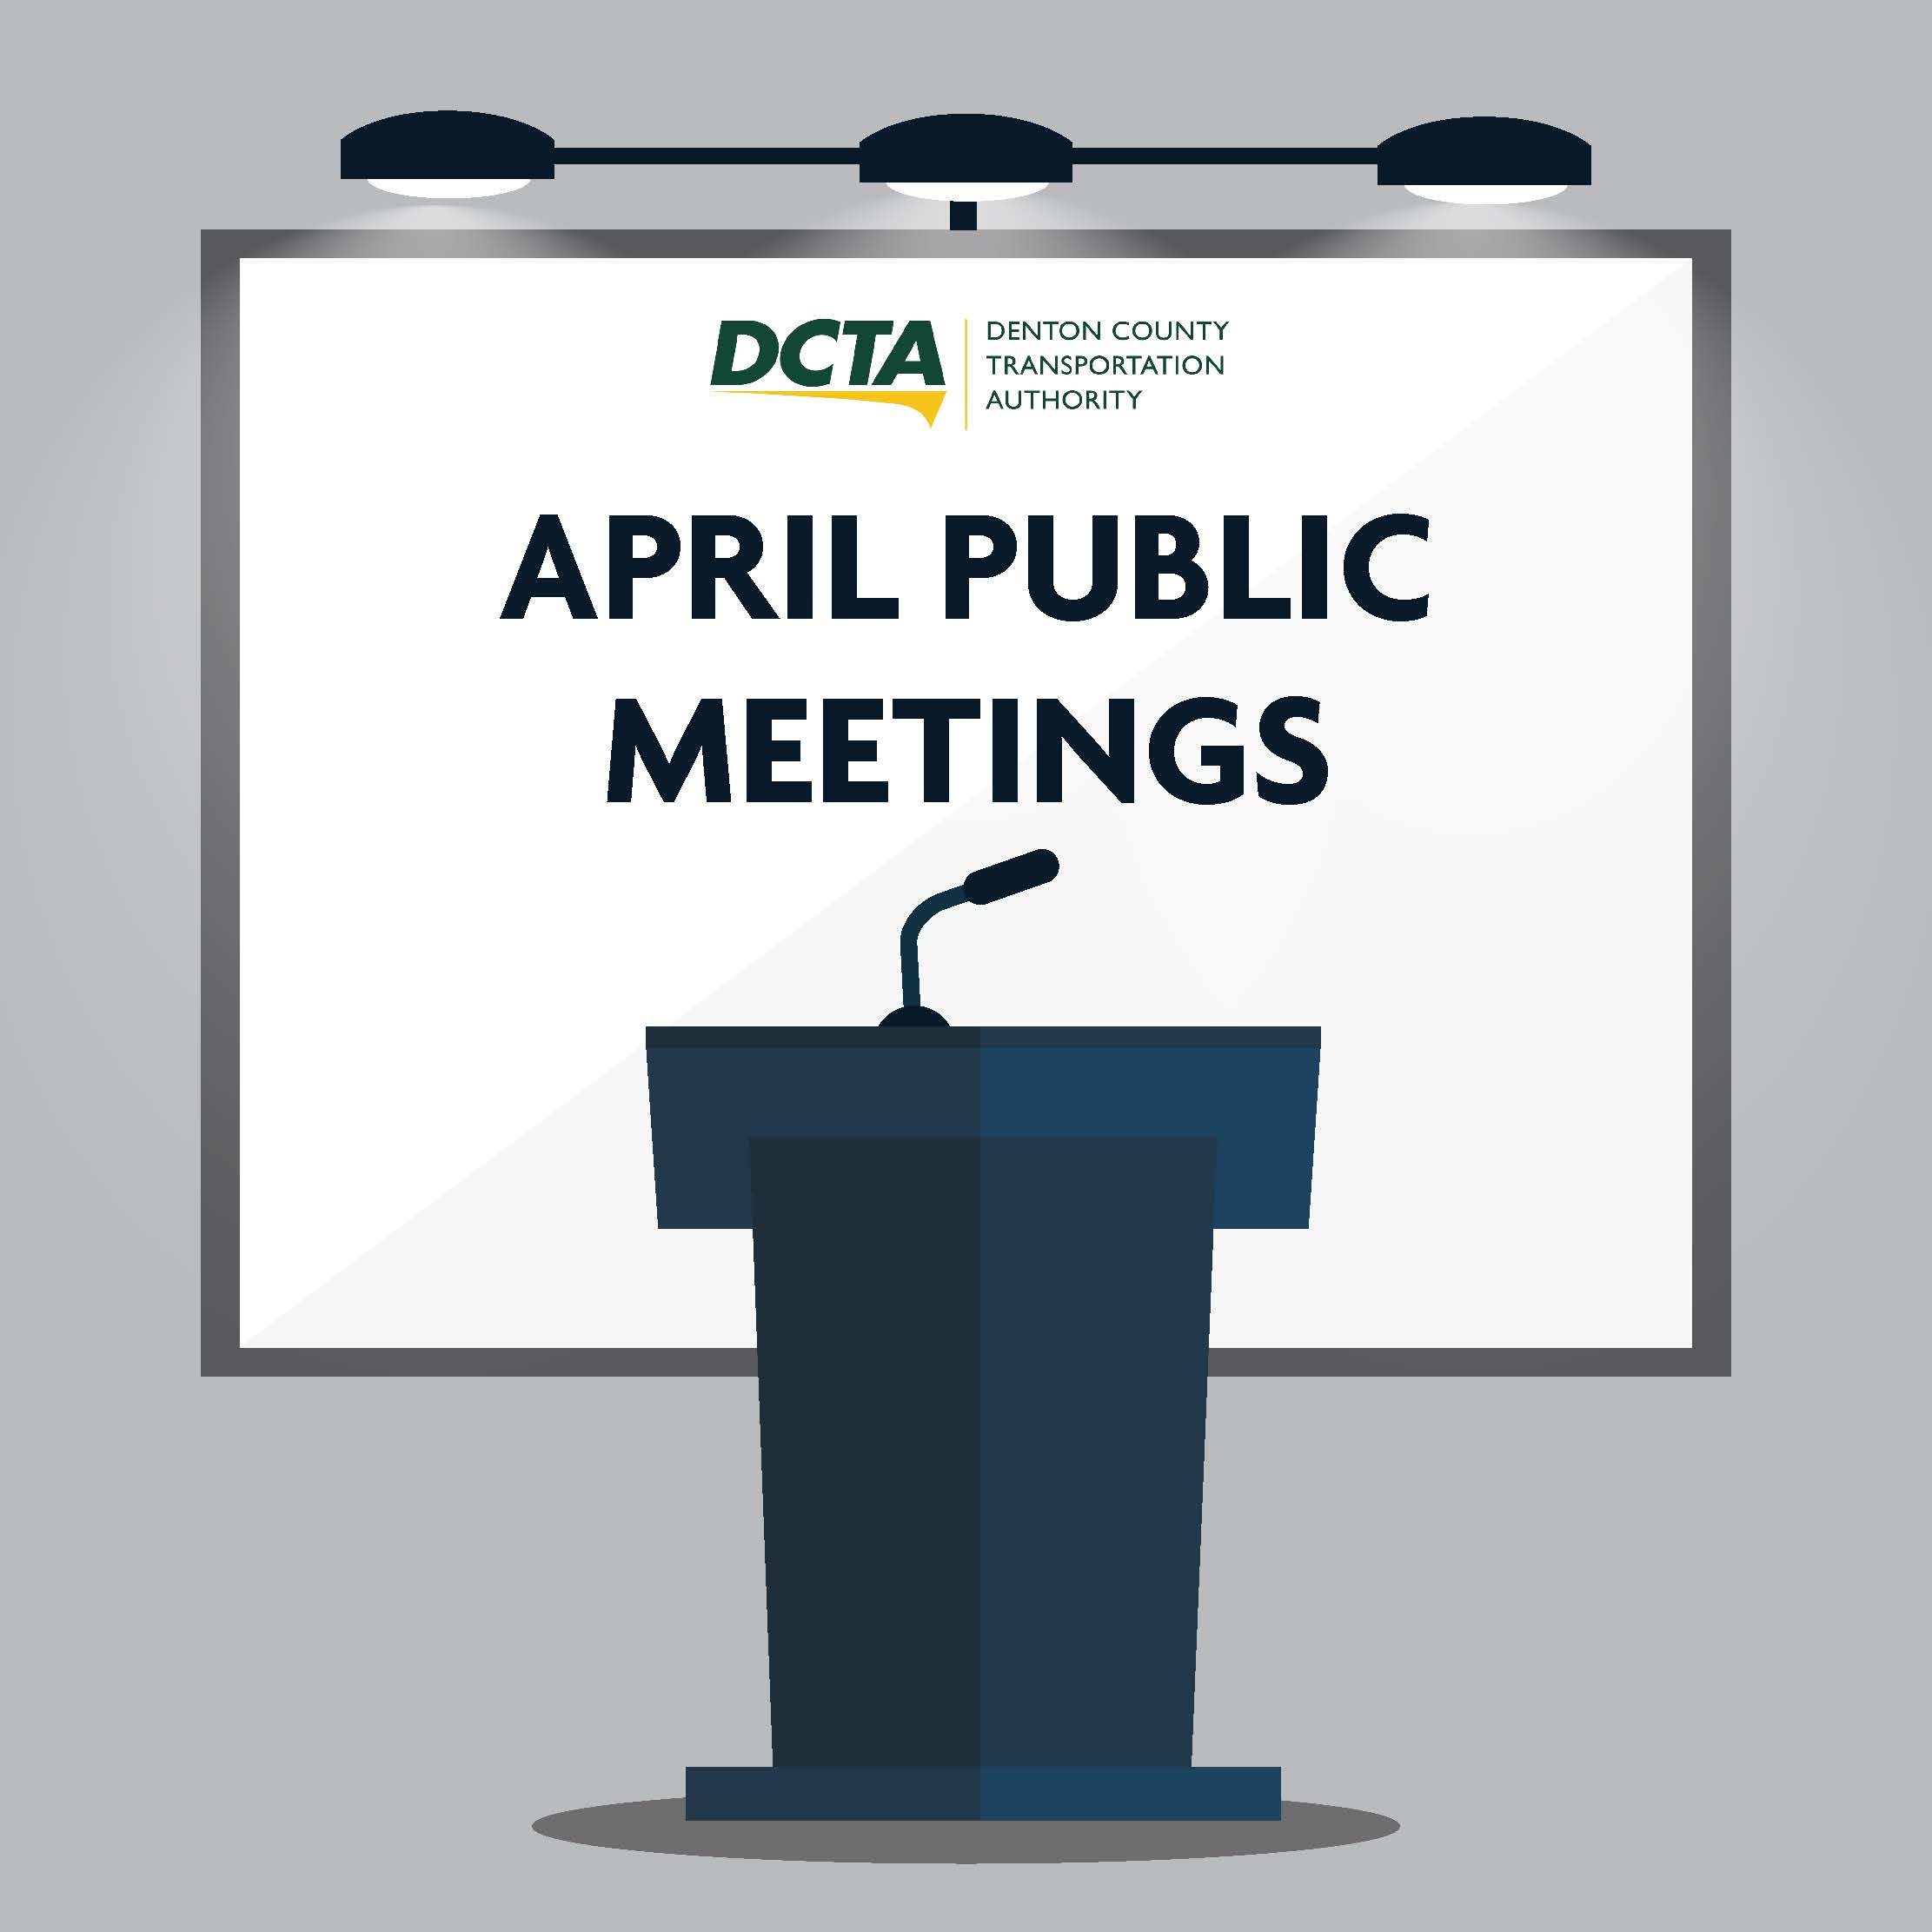 Join Us at Our April Public Meetings